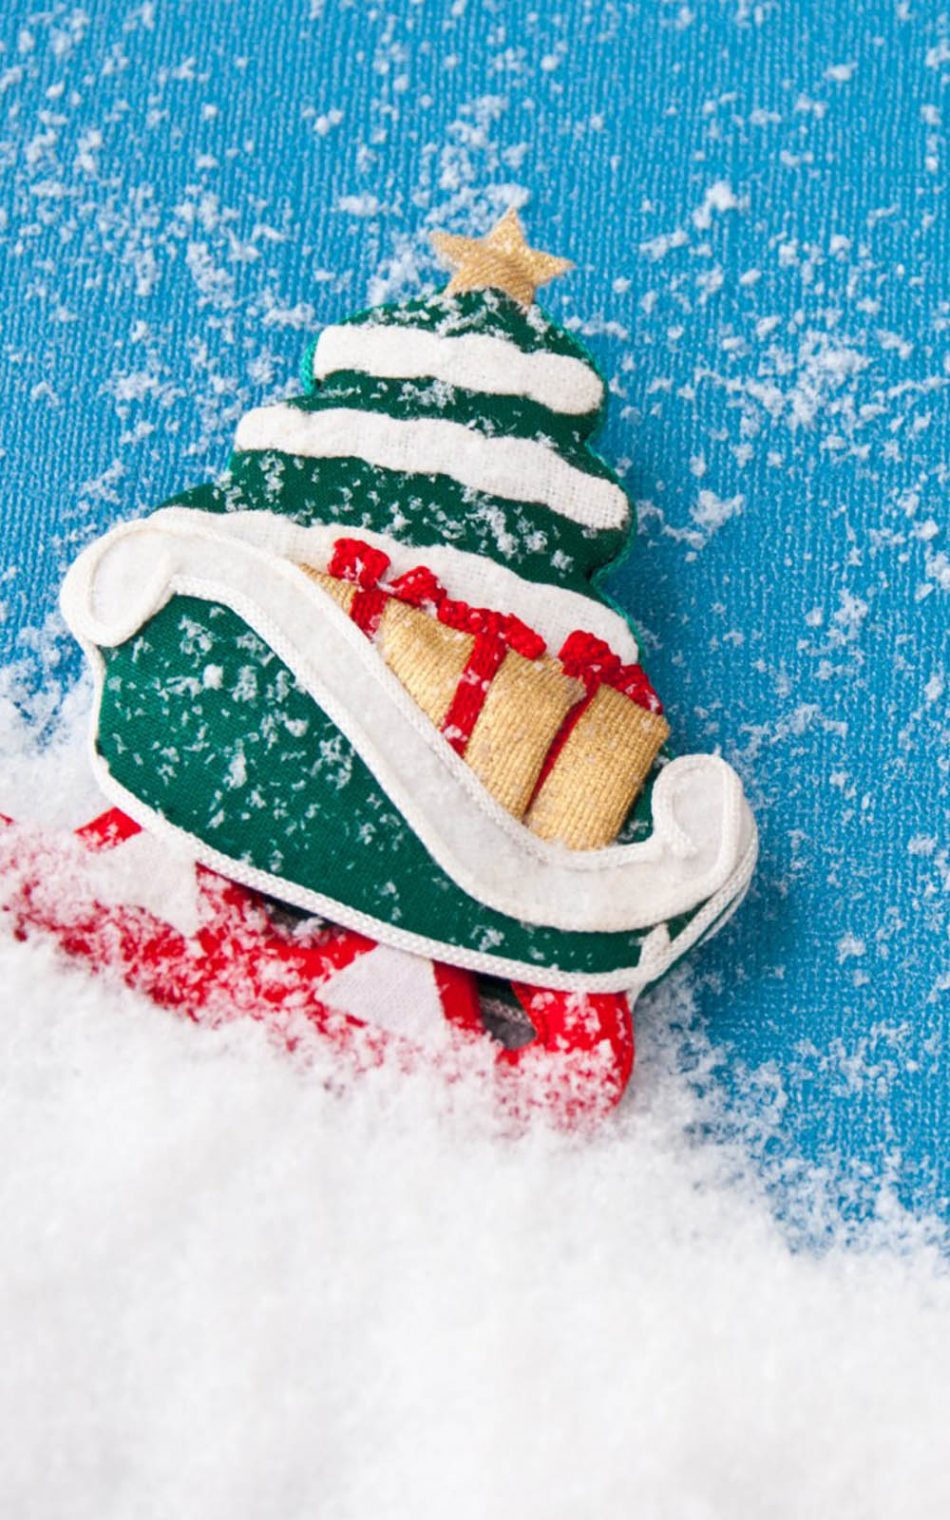 Christmas Snow Winter Gifts Hd Mobile Wallpaper - Christmas Sleigh With Gifts - HD Wallpaper 